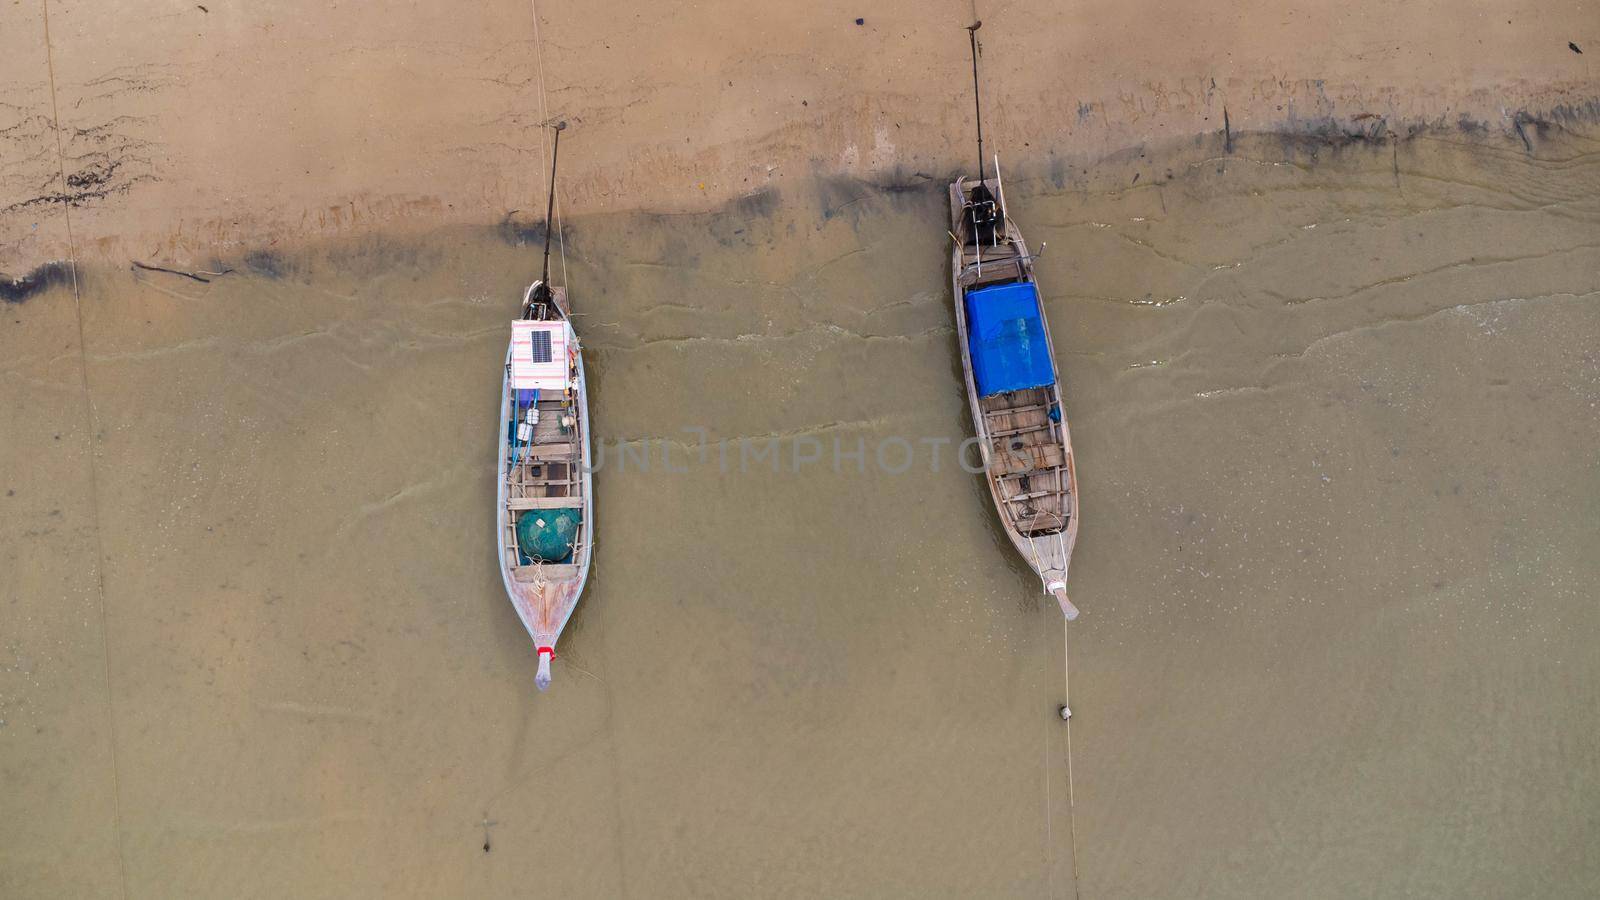 Many fishing boats near the seashore in tropical islands. Pier of the villagers on the southern island of Thailand. top view from drones.